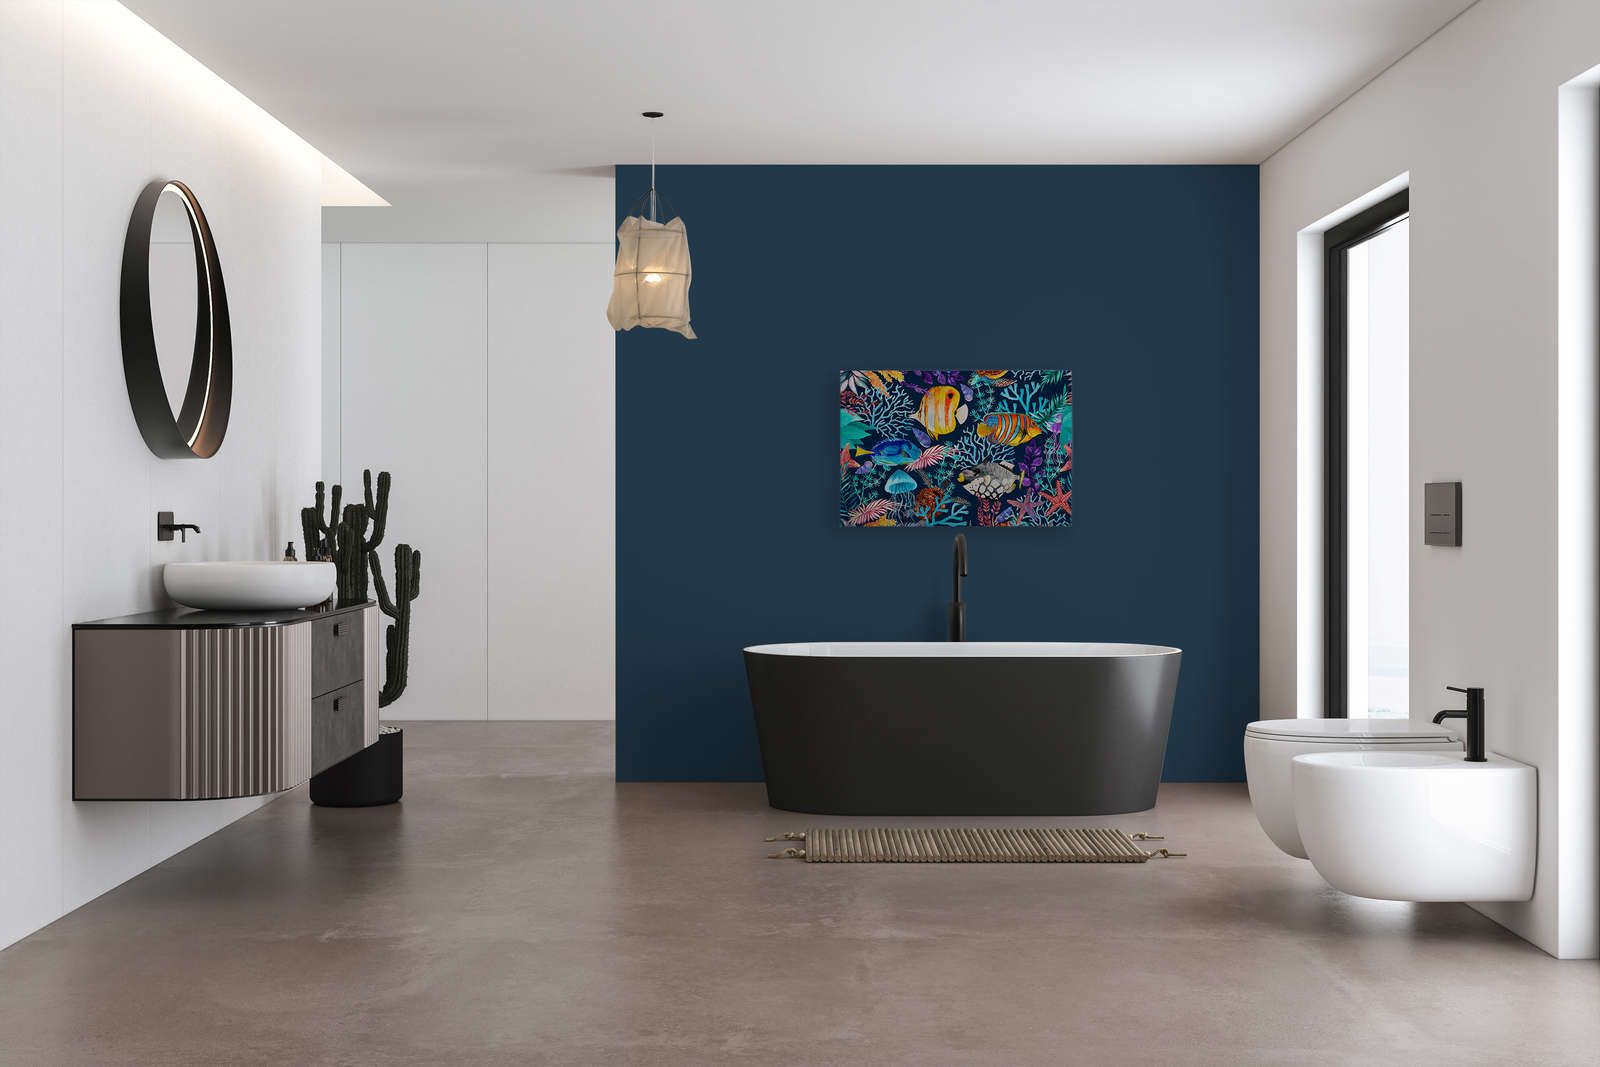             Underwater Canvas Painting with Colourful Fish & Starfish - 0.90 m x 0.60 m
        